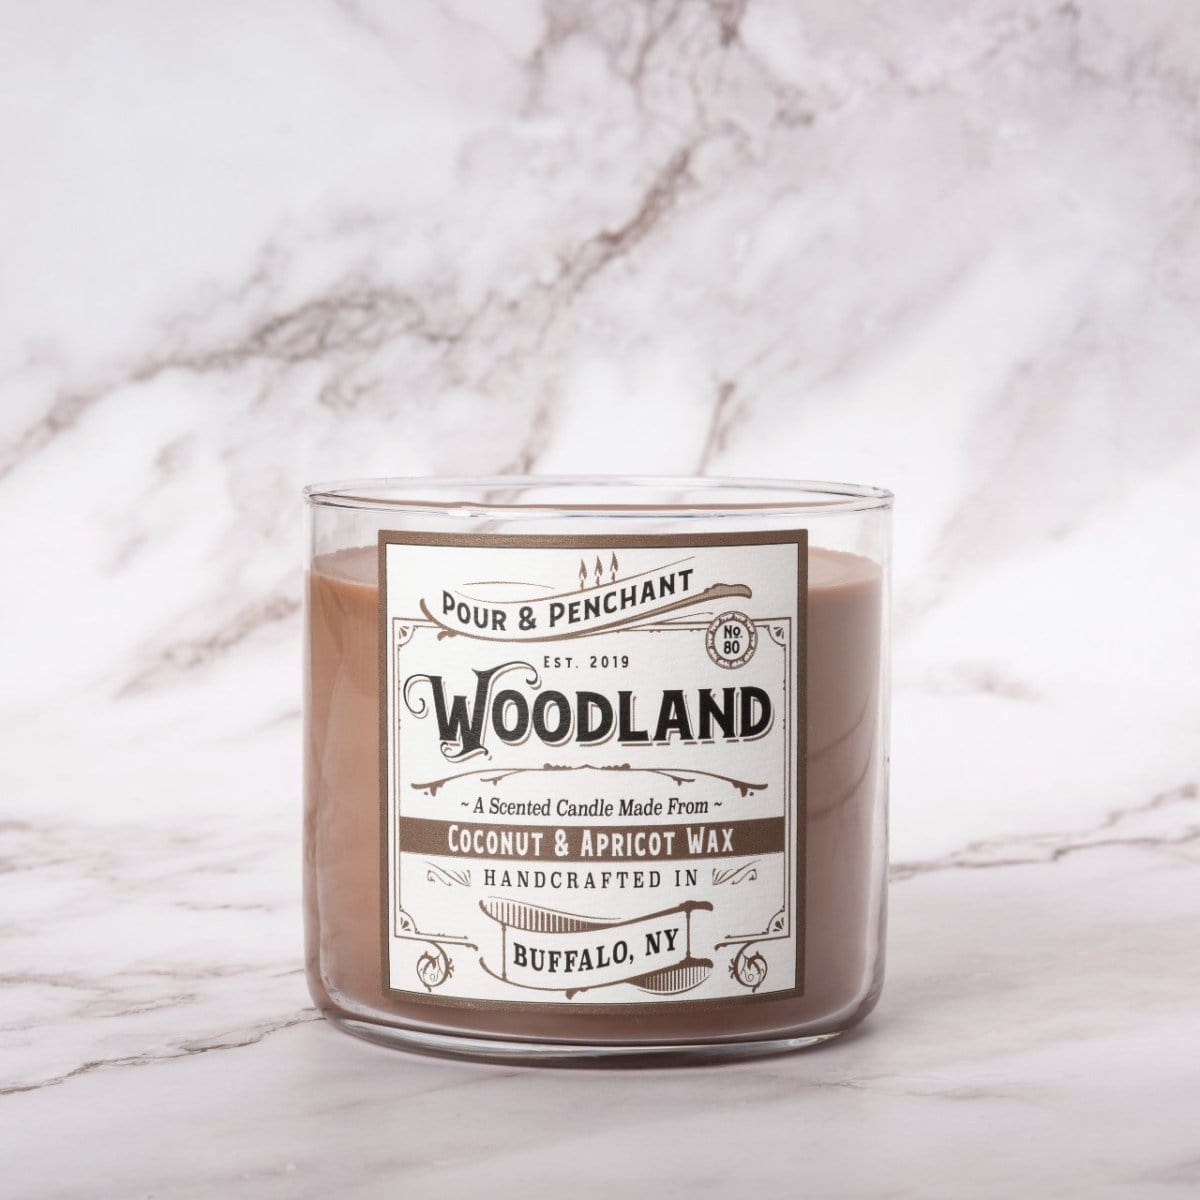 WOODLAND no.80 - Pour & Penchant Scented Candle